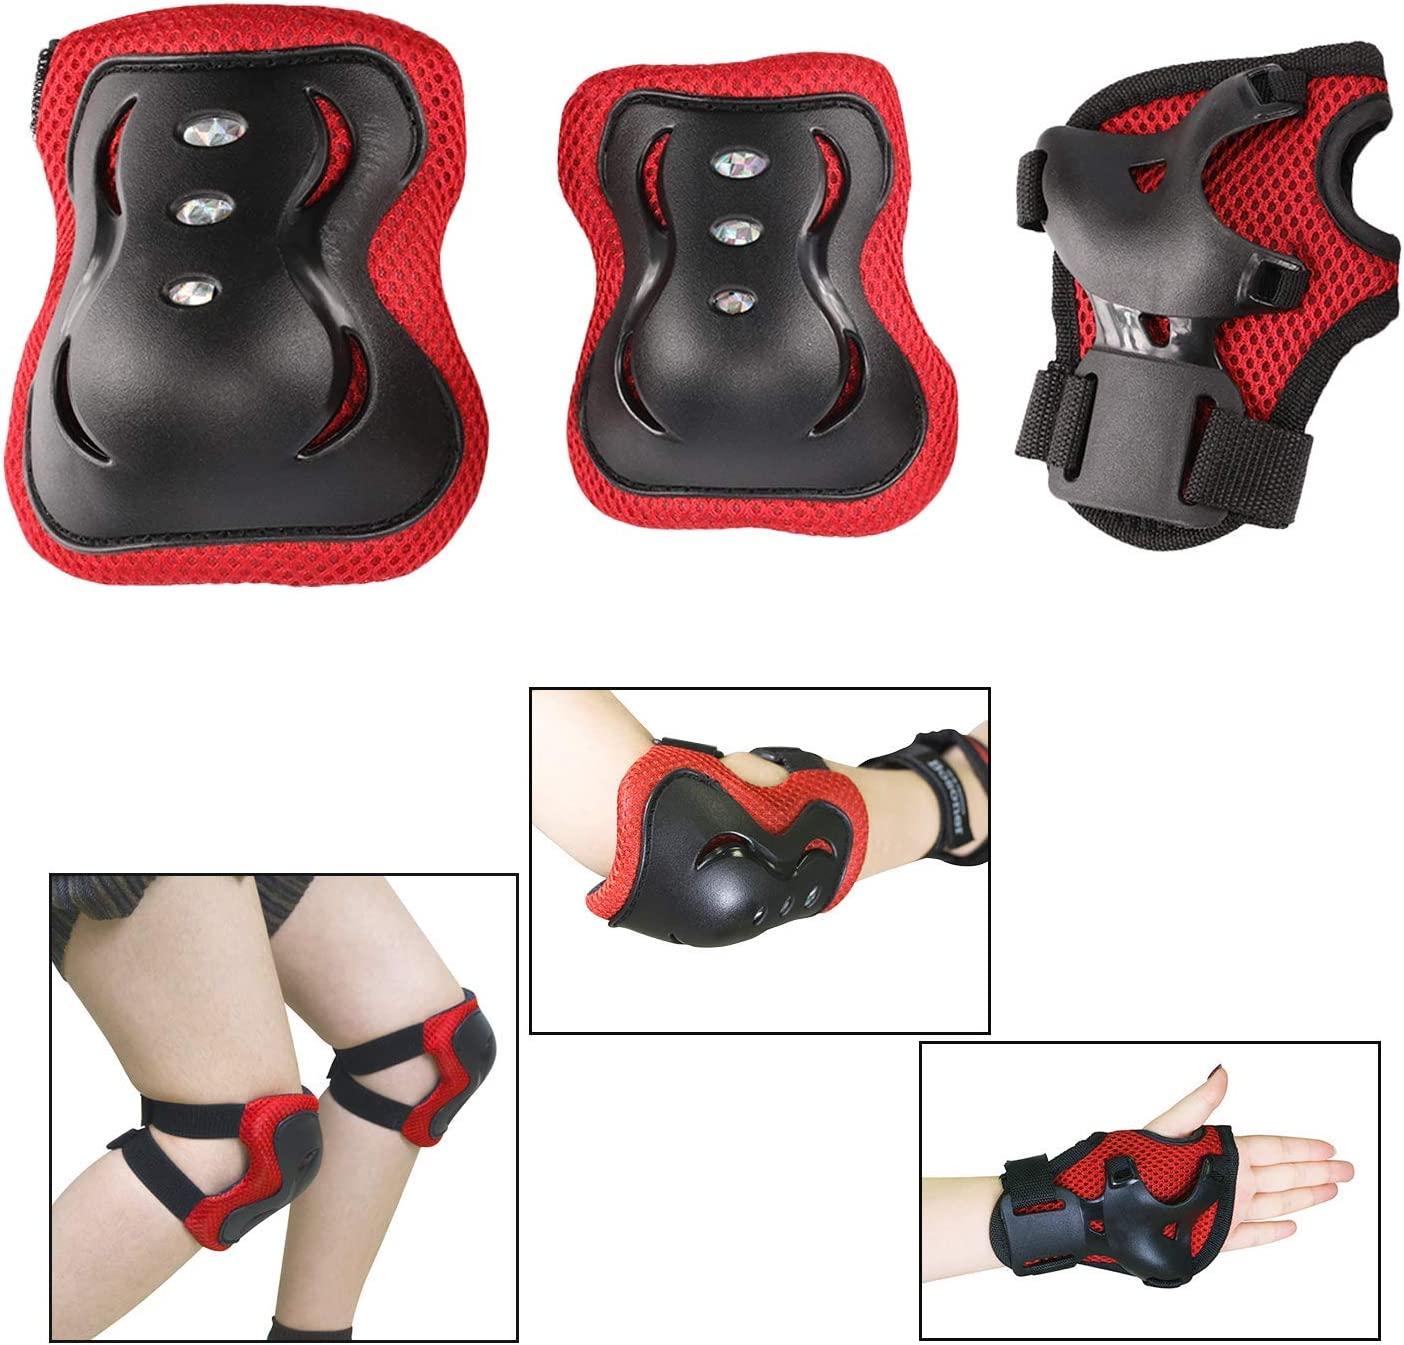 BOSONER Kids/Youth Knee Pad Elbow Pads Guards Protective Gear Set for  Roller Skates Cycling BMX Bike Skateboard Inline Skatings Scooter Riding  Sports